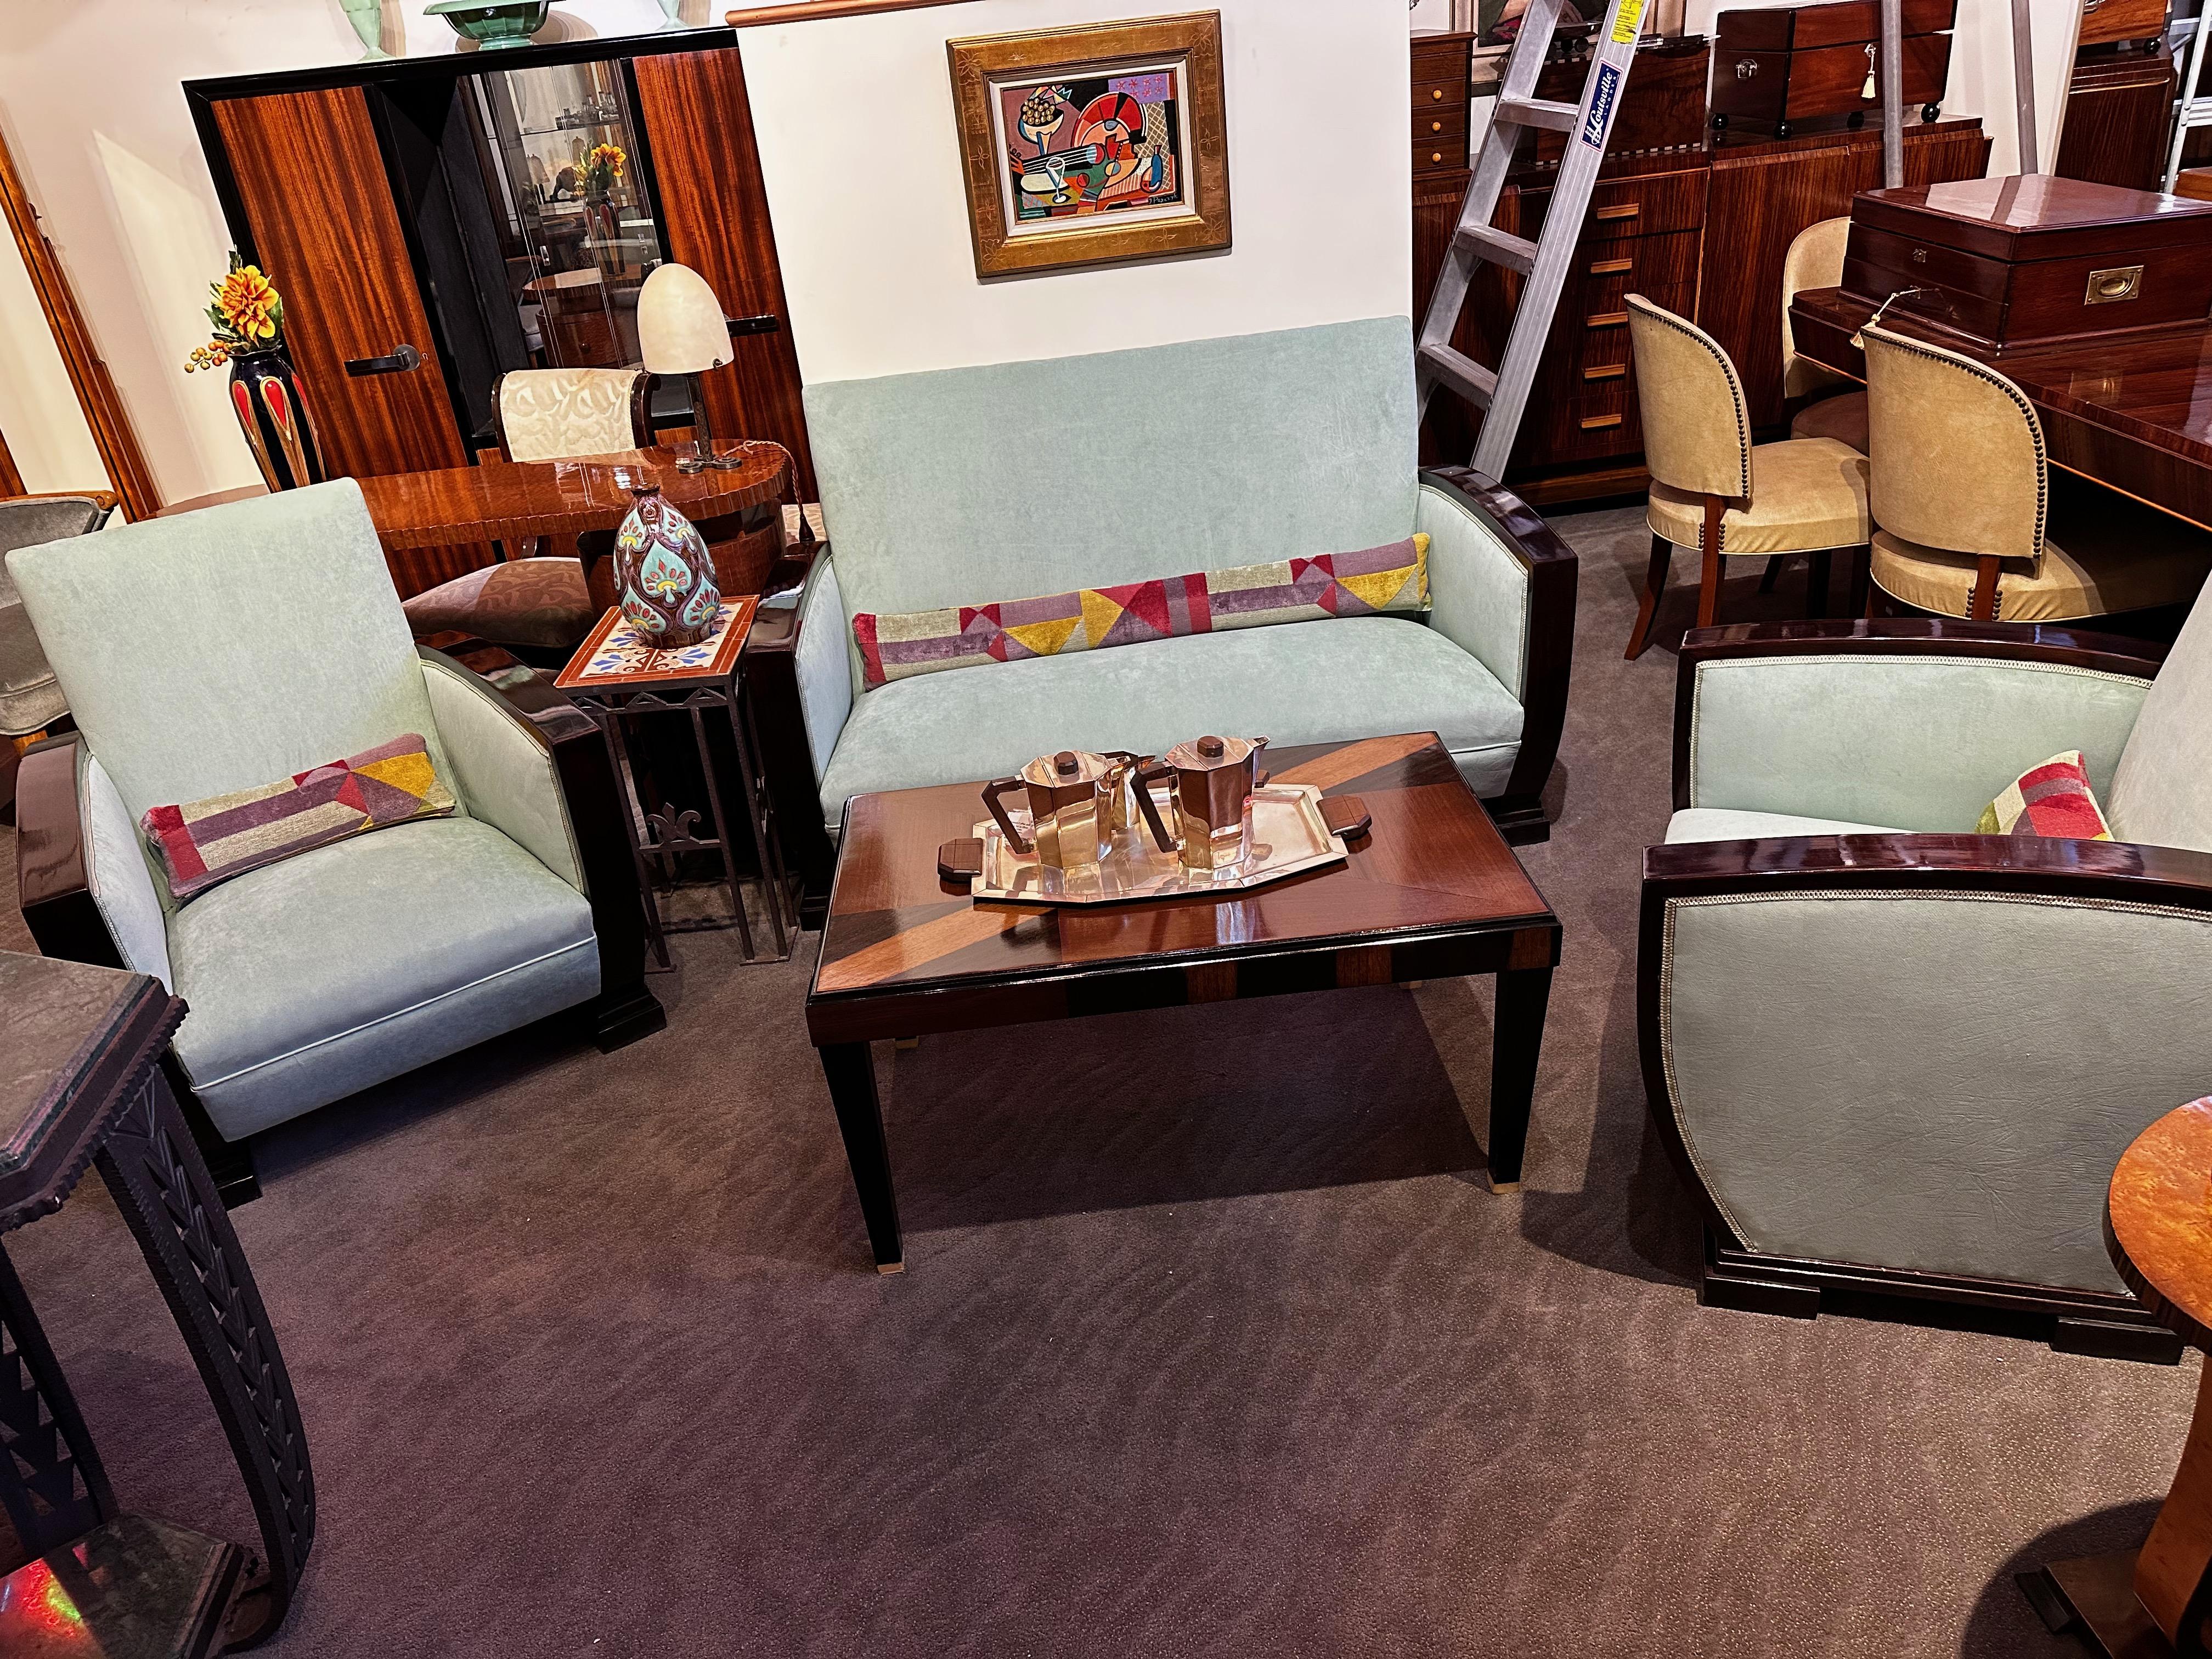 Art Deco French Style Three Piece Sofa Suite, recently restored with new cushioning and soft velvet fabric. These pieces are very comfortable which makes this set a pleasure to own and use. The wood framing has been restored as well. The color is